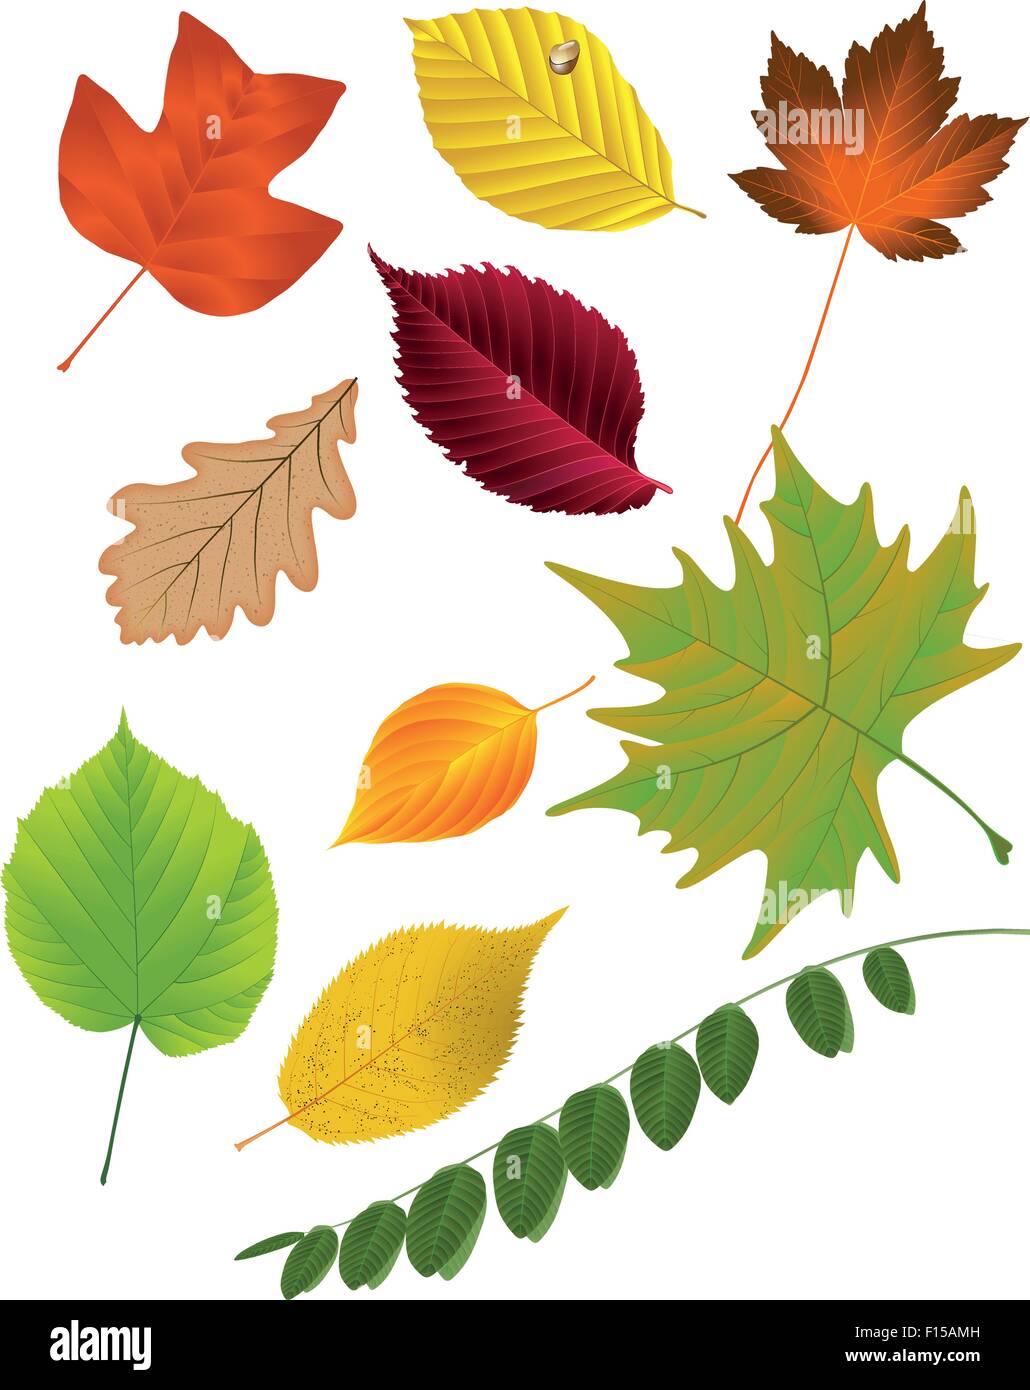 Autumn leaf collection, vector illustration Stock Vector